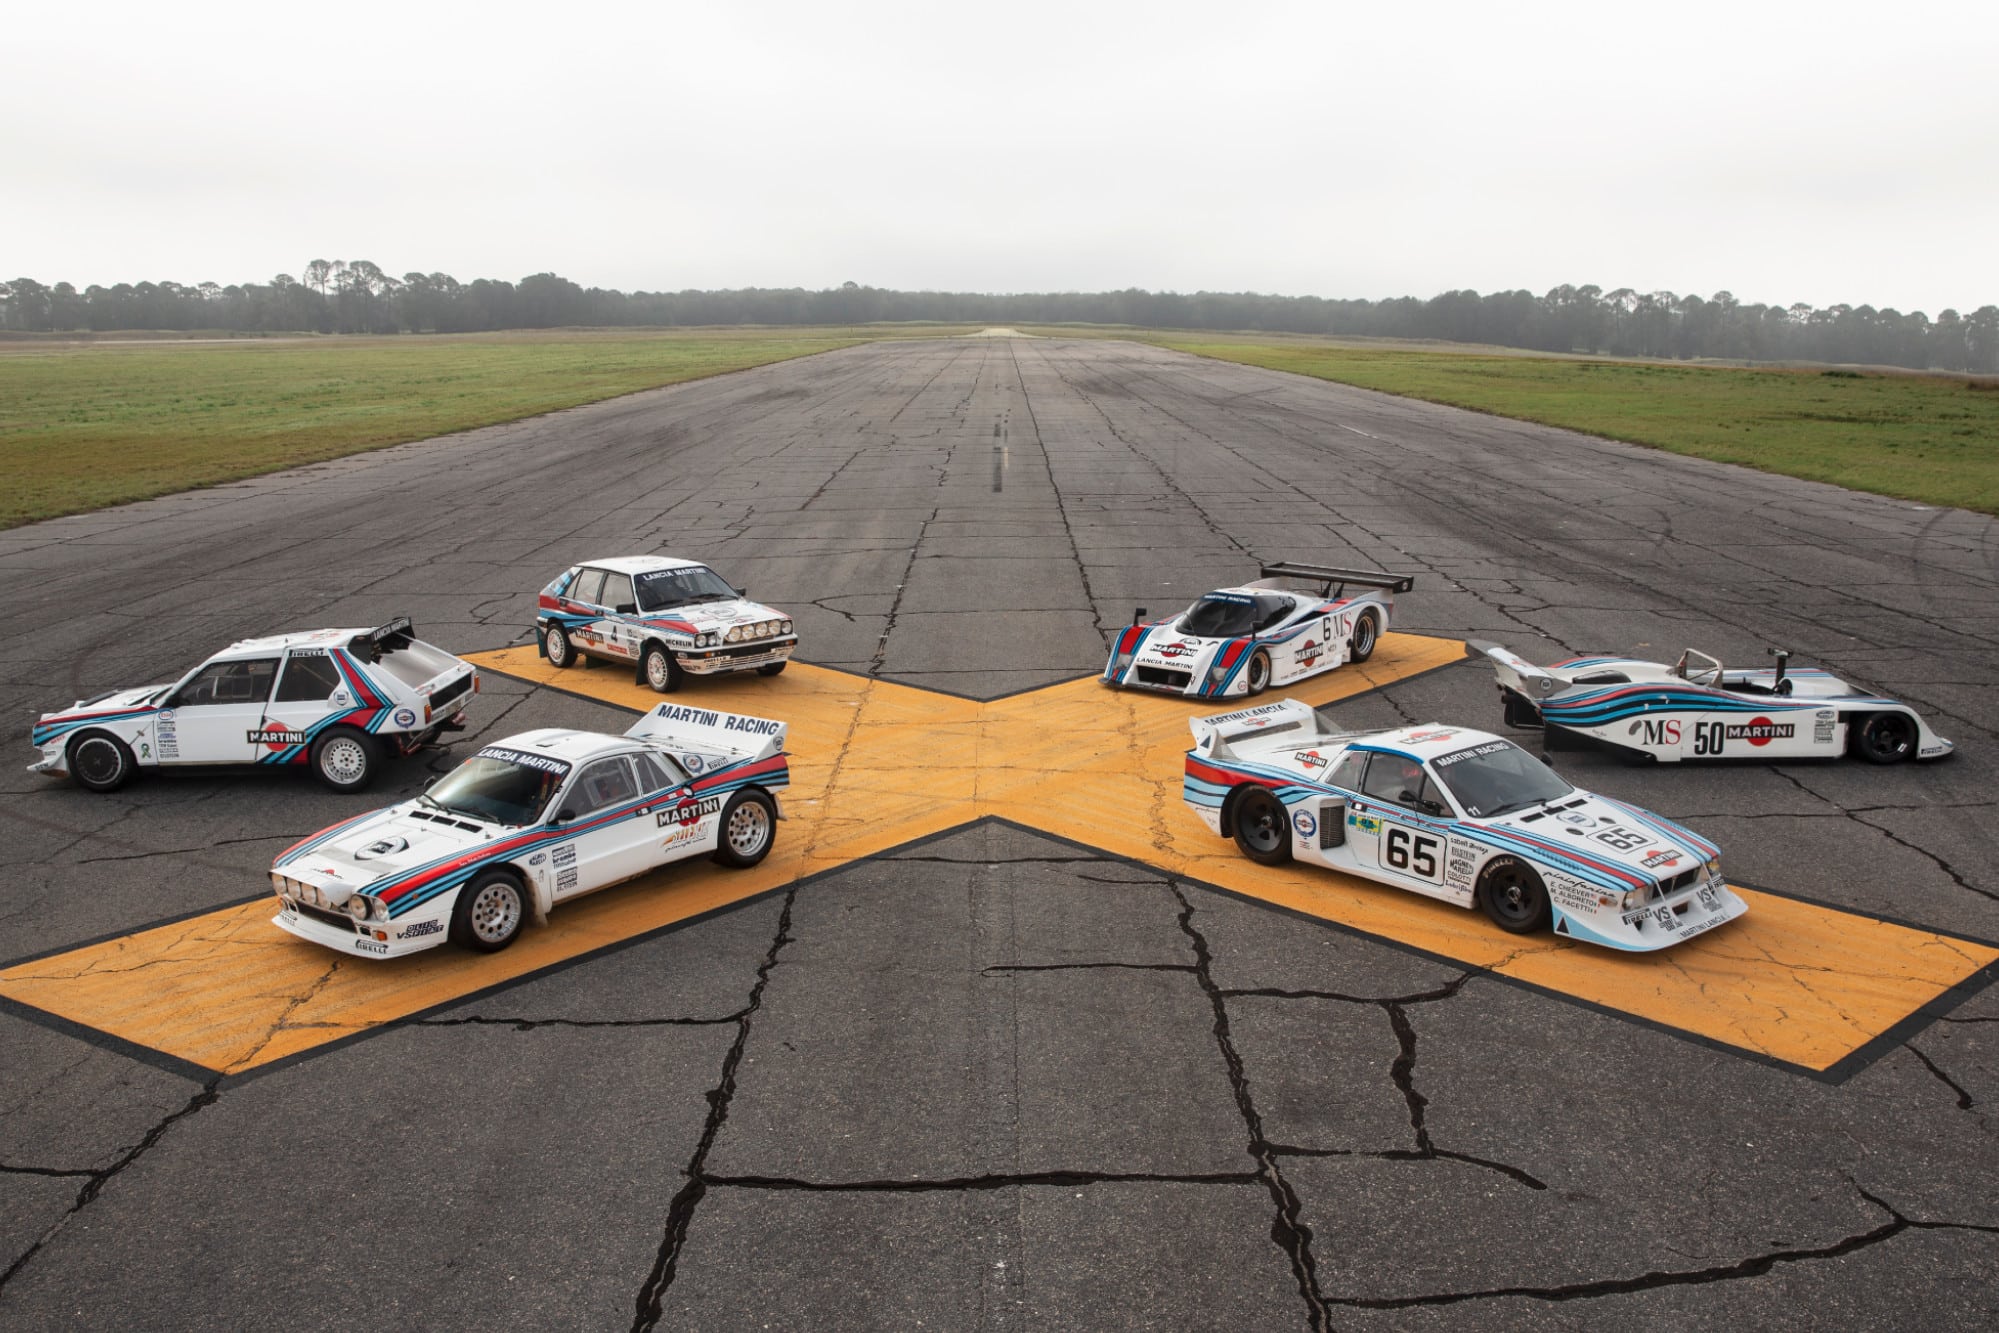 Exclusive: up close with the Martini racers